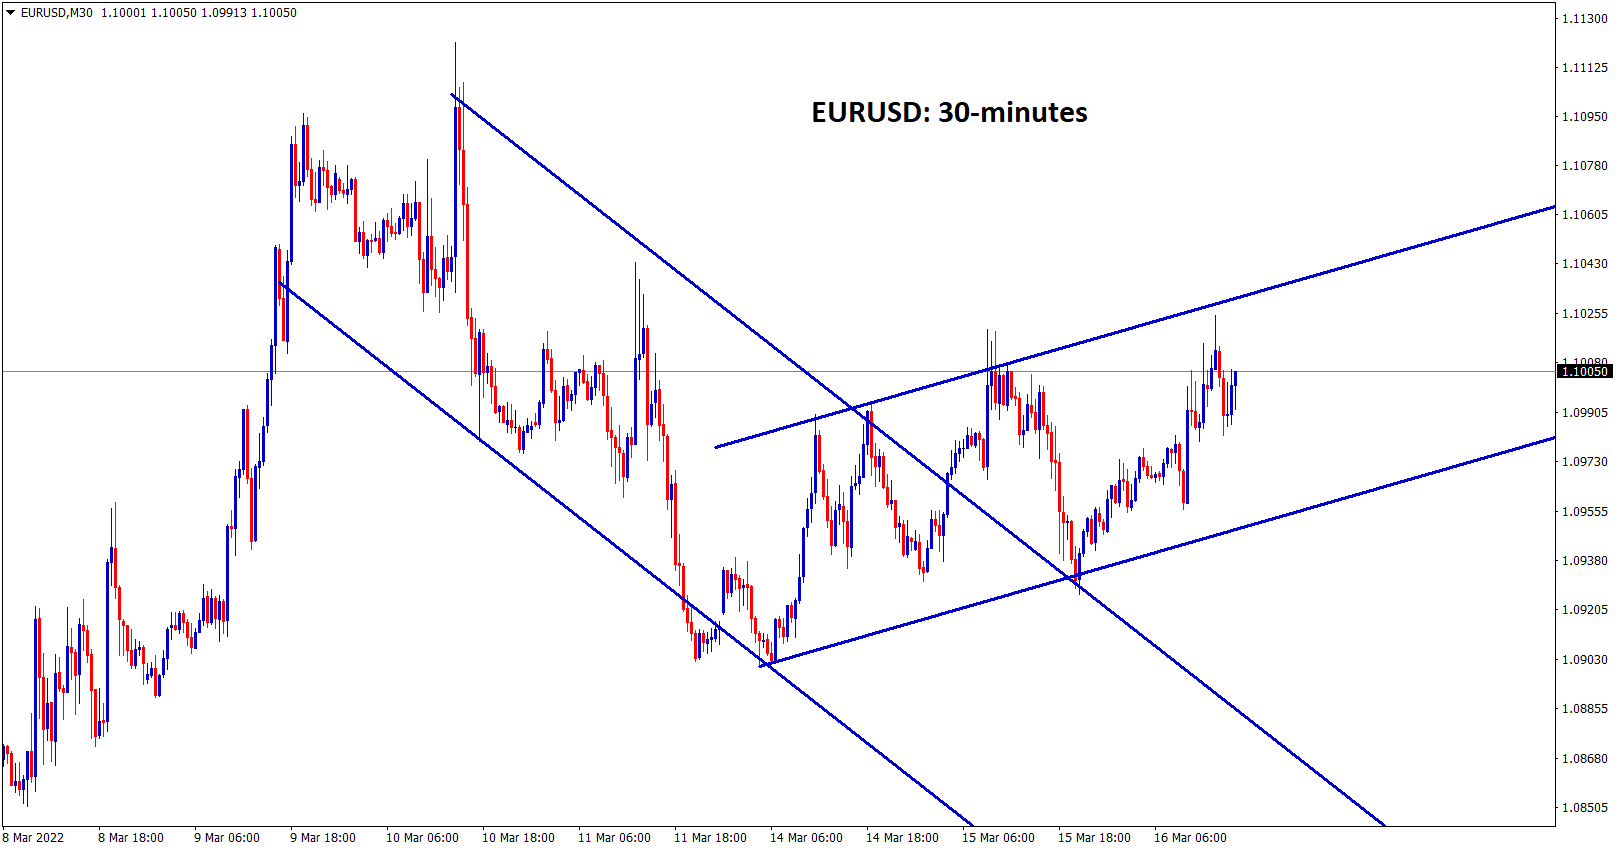 EURUSD is moving between the channel ranges